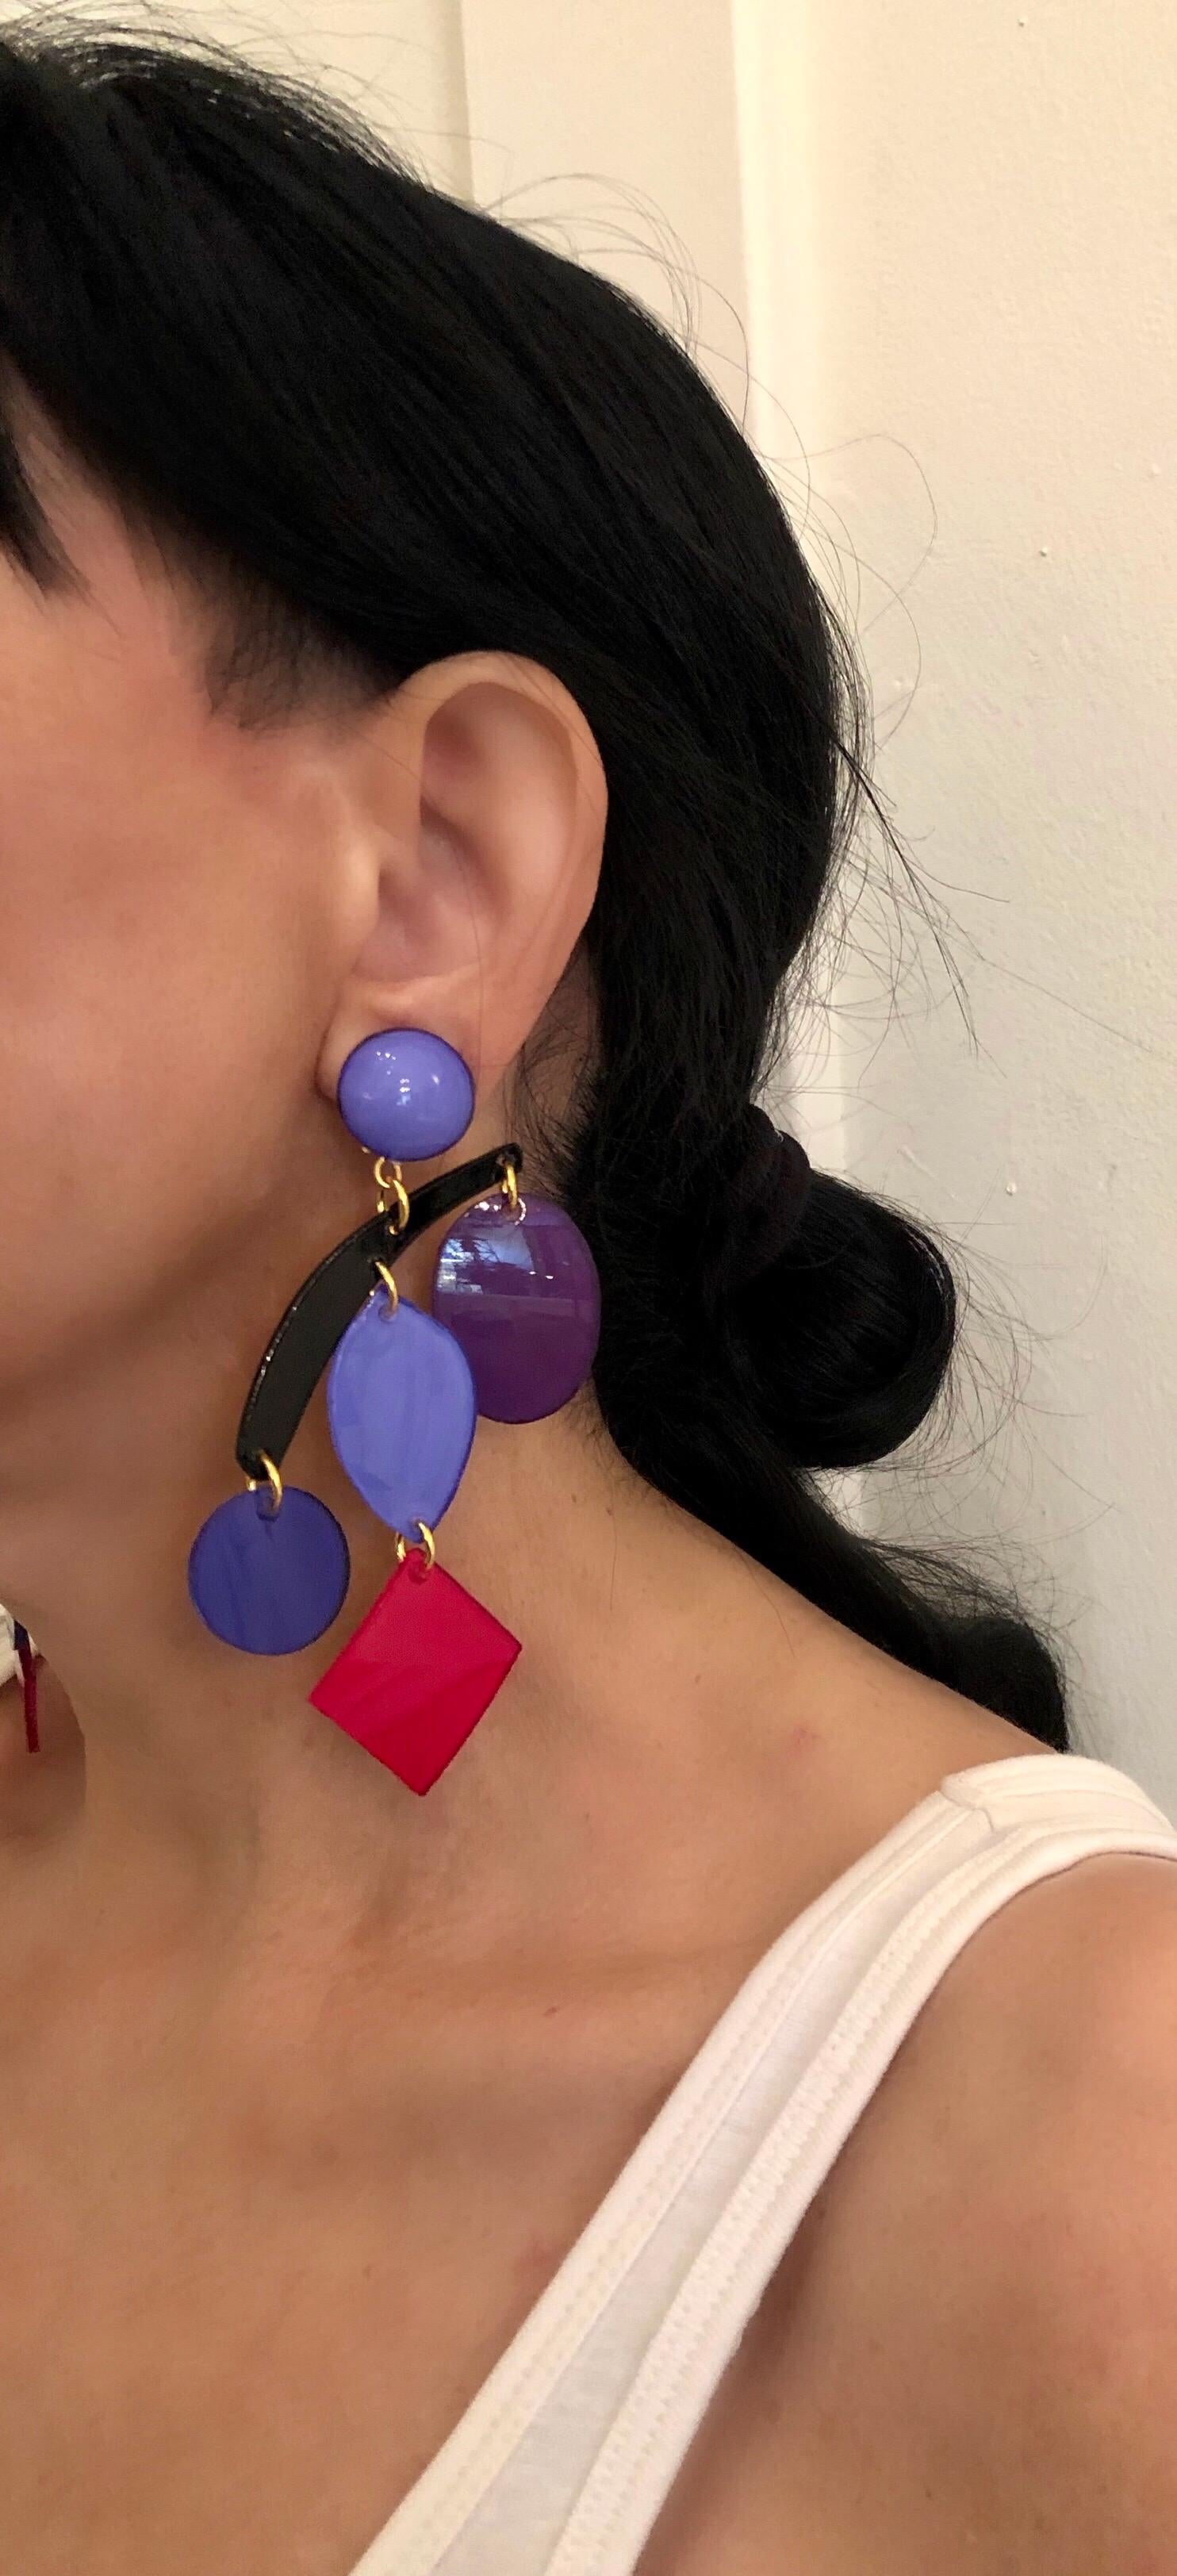 Contemporary Colorful Modern Mobile Sculpture Statement Earrings 